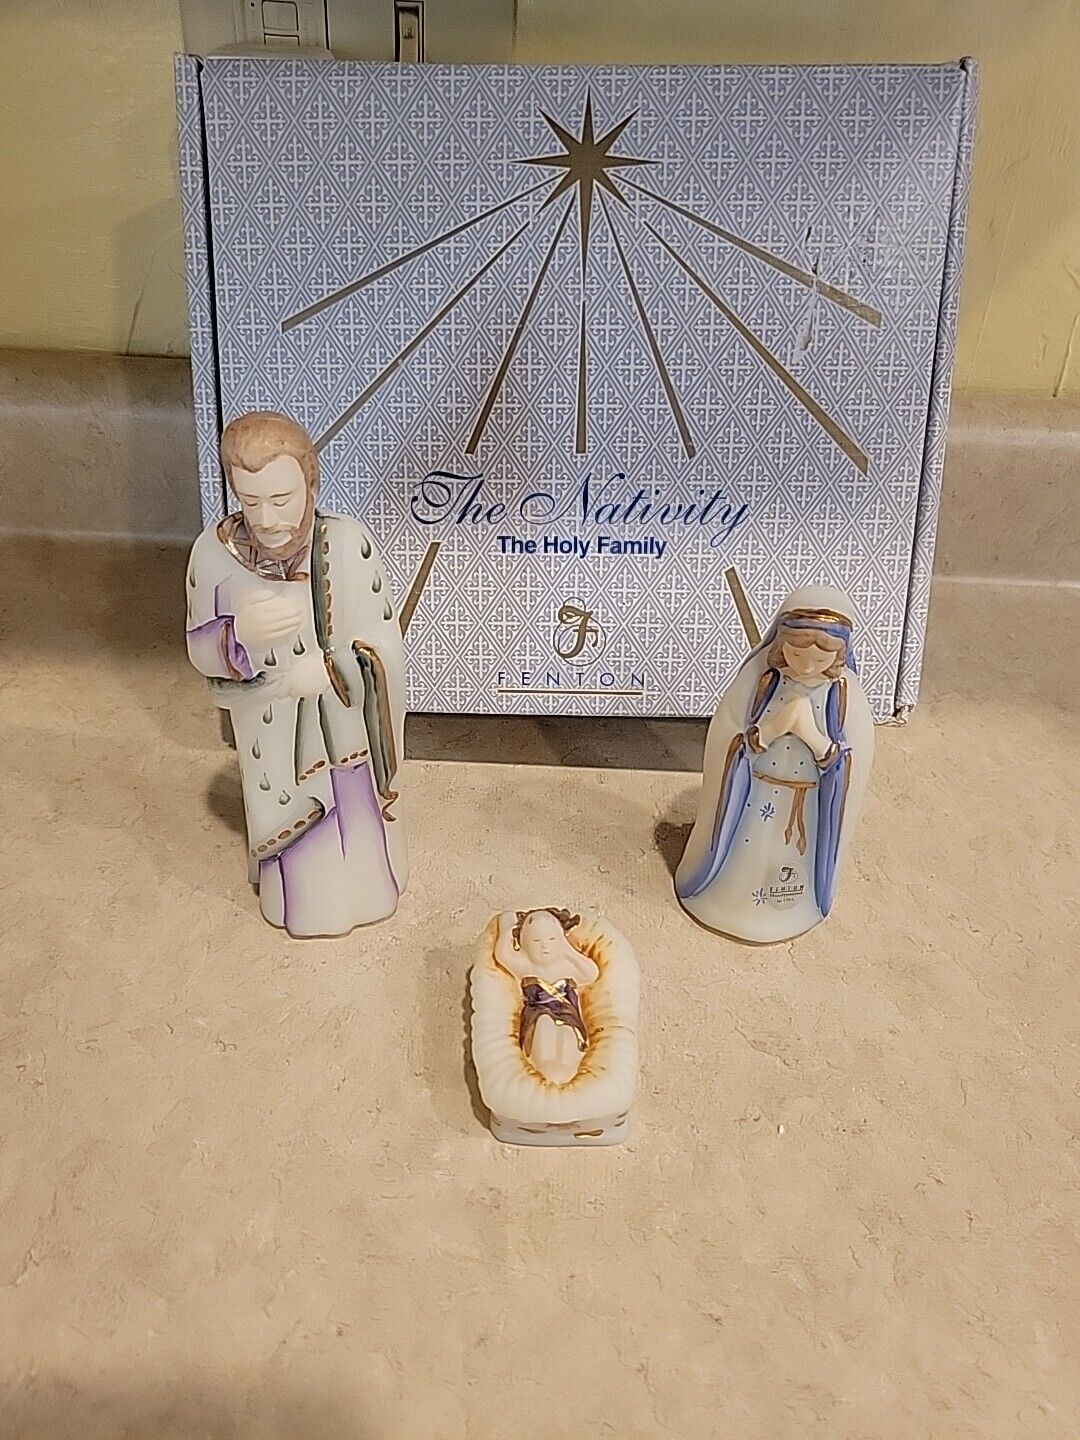 FENTON THE HOLY FAMILY FIRST EDITION With BOX 5280